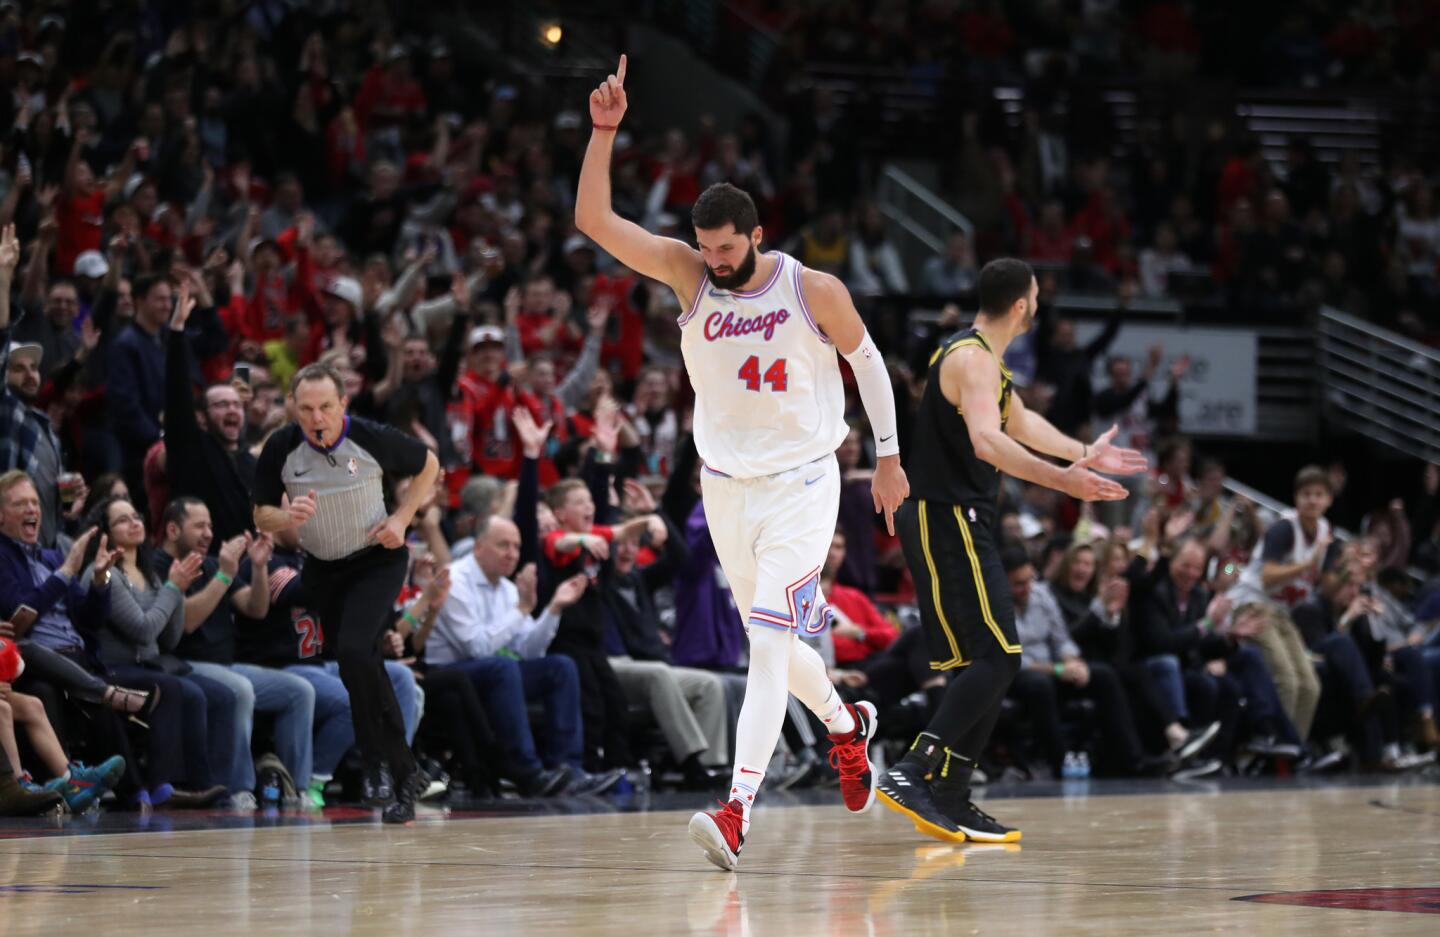 Nikola Mirotic reacts after hitting a 3-pointer in the second half against the Lakers at the United Center on Jan. 26, 2018.